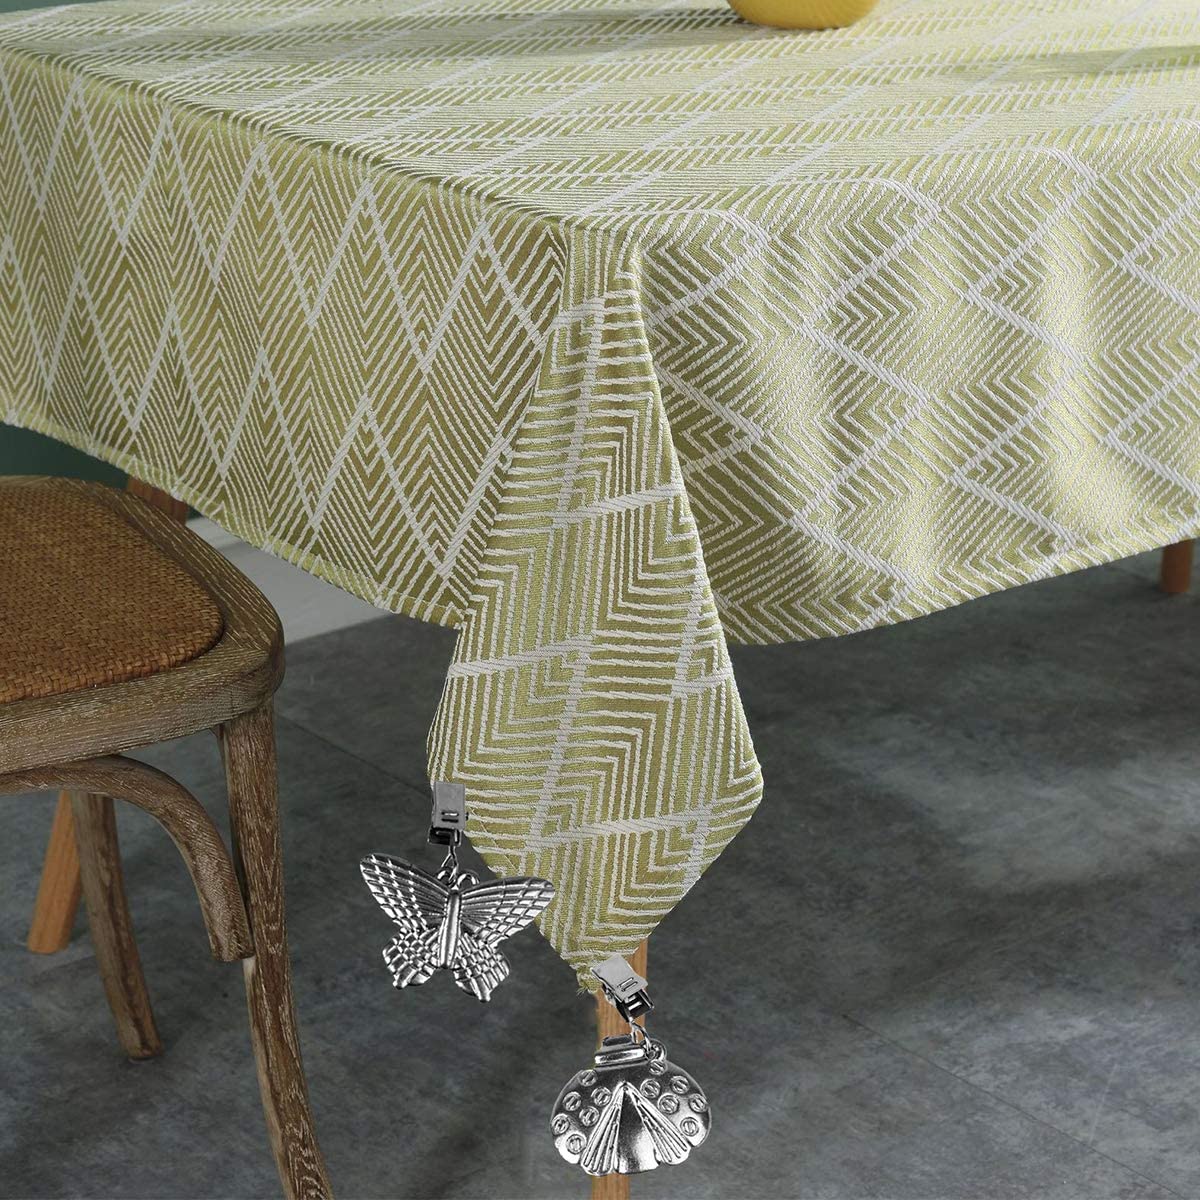 Pineapple Tablecloth Weights with Metal Clips for Outdoor Garden Party Picnic Table Covers